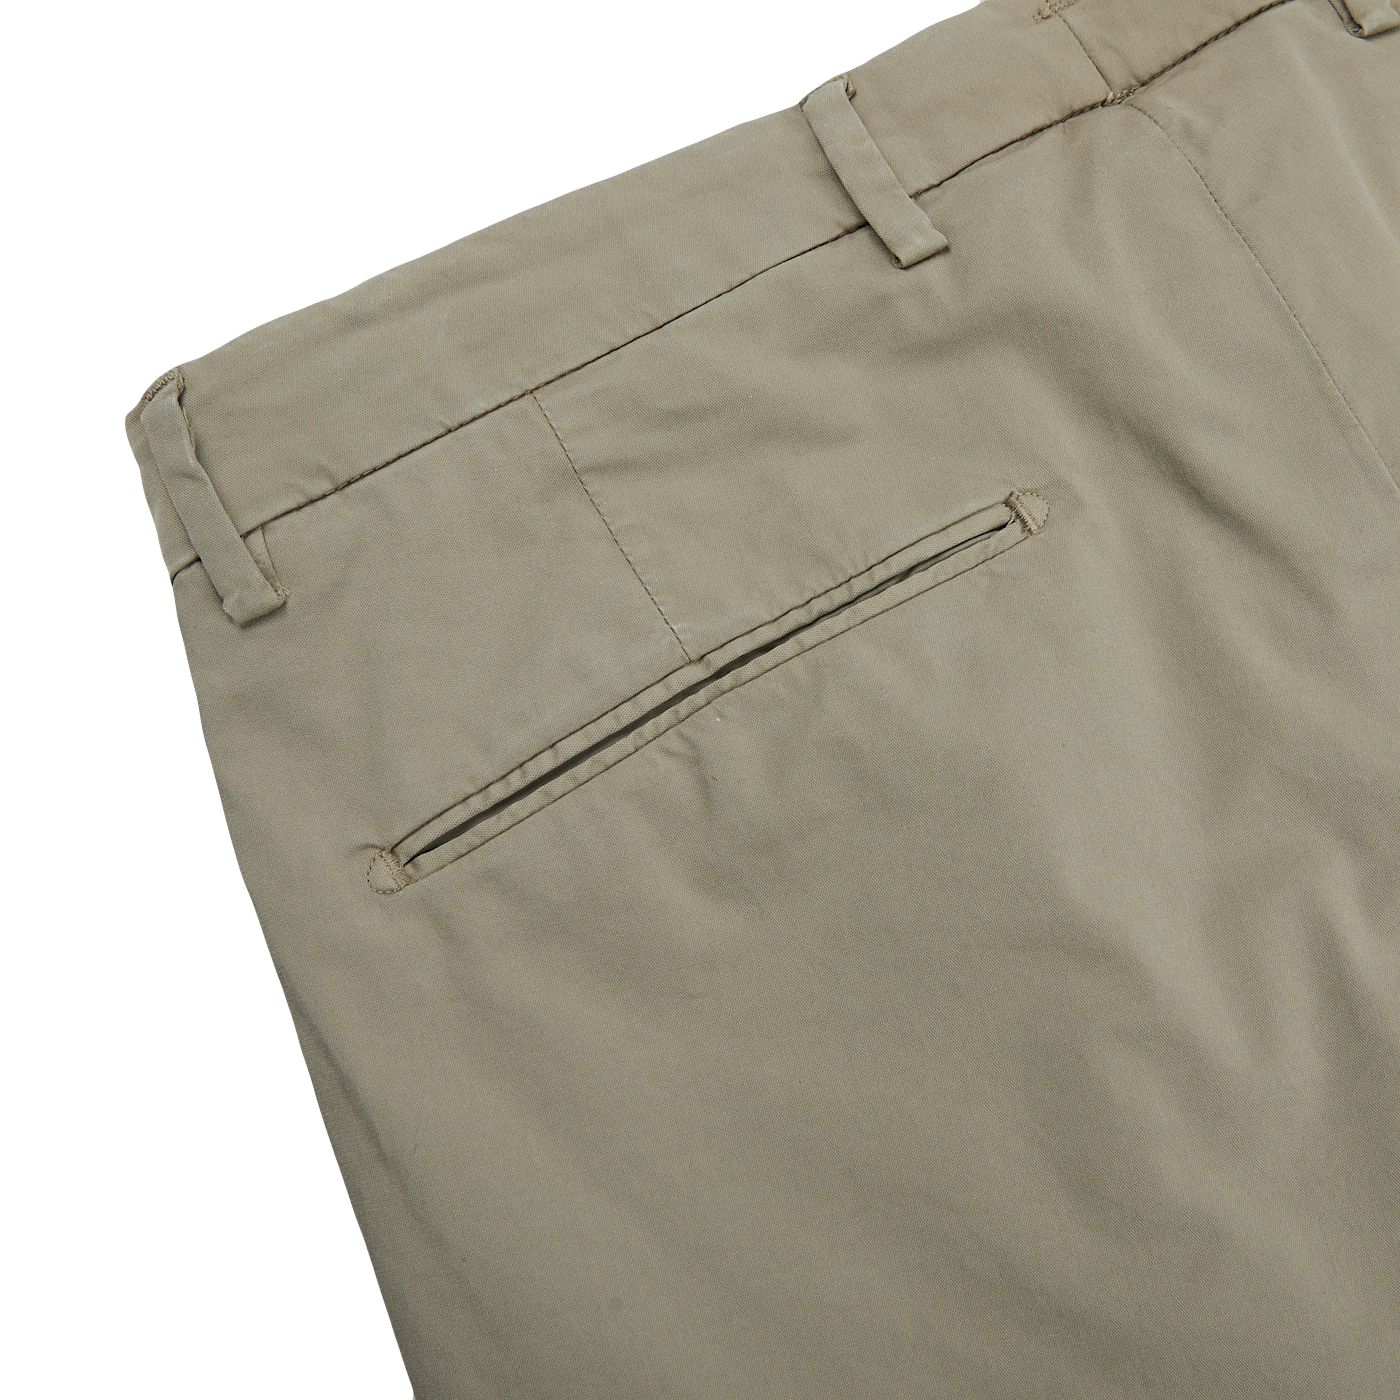 The Mole Cotton Stretch BG07 Pleated Chinos for men, made from cotton with stretch, are crafted by Italian trouser specialist Briglia.